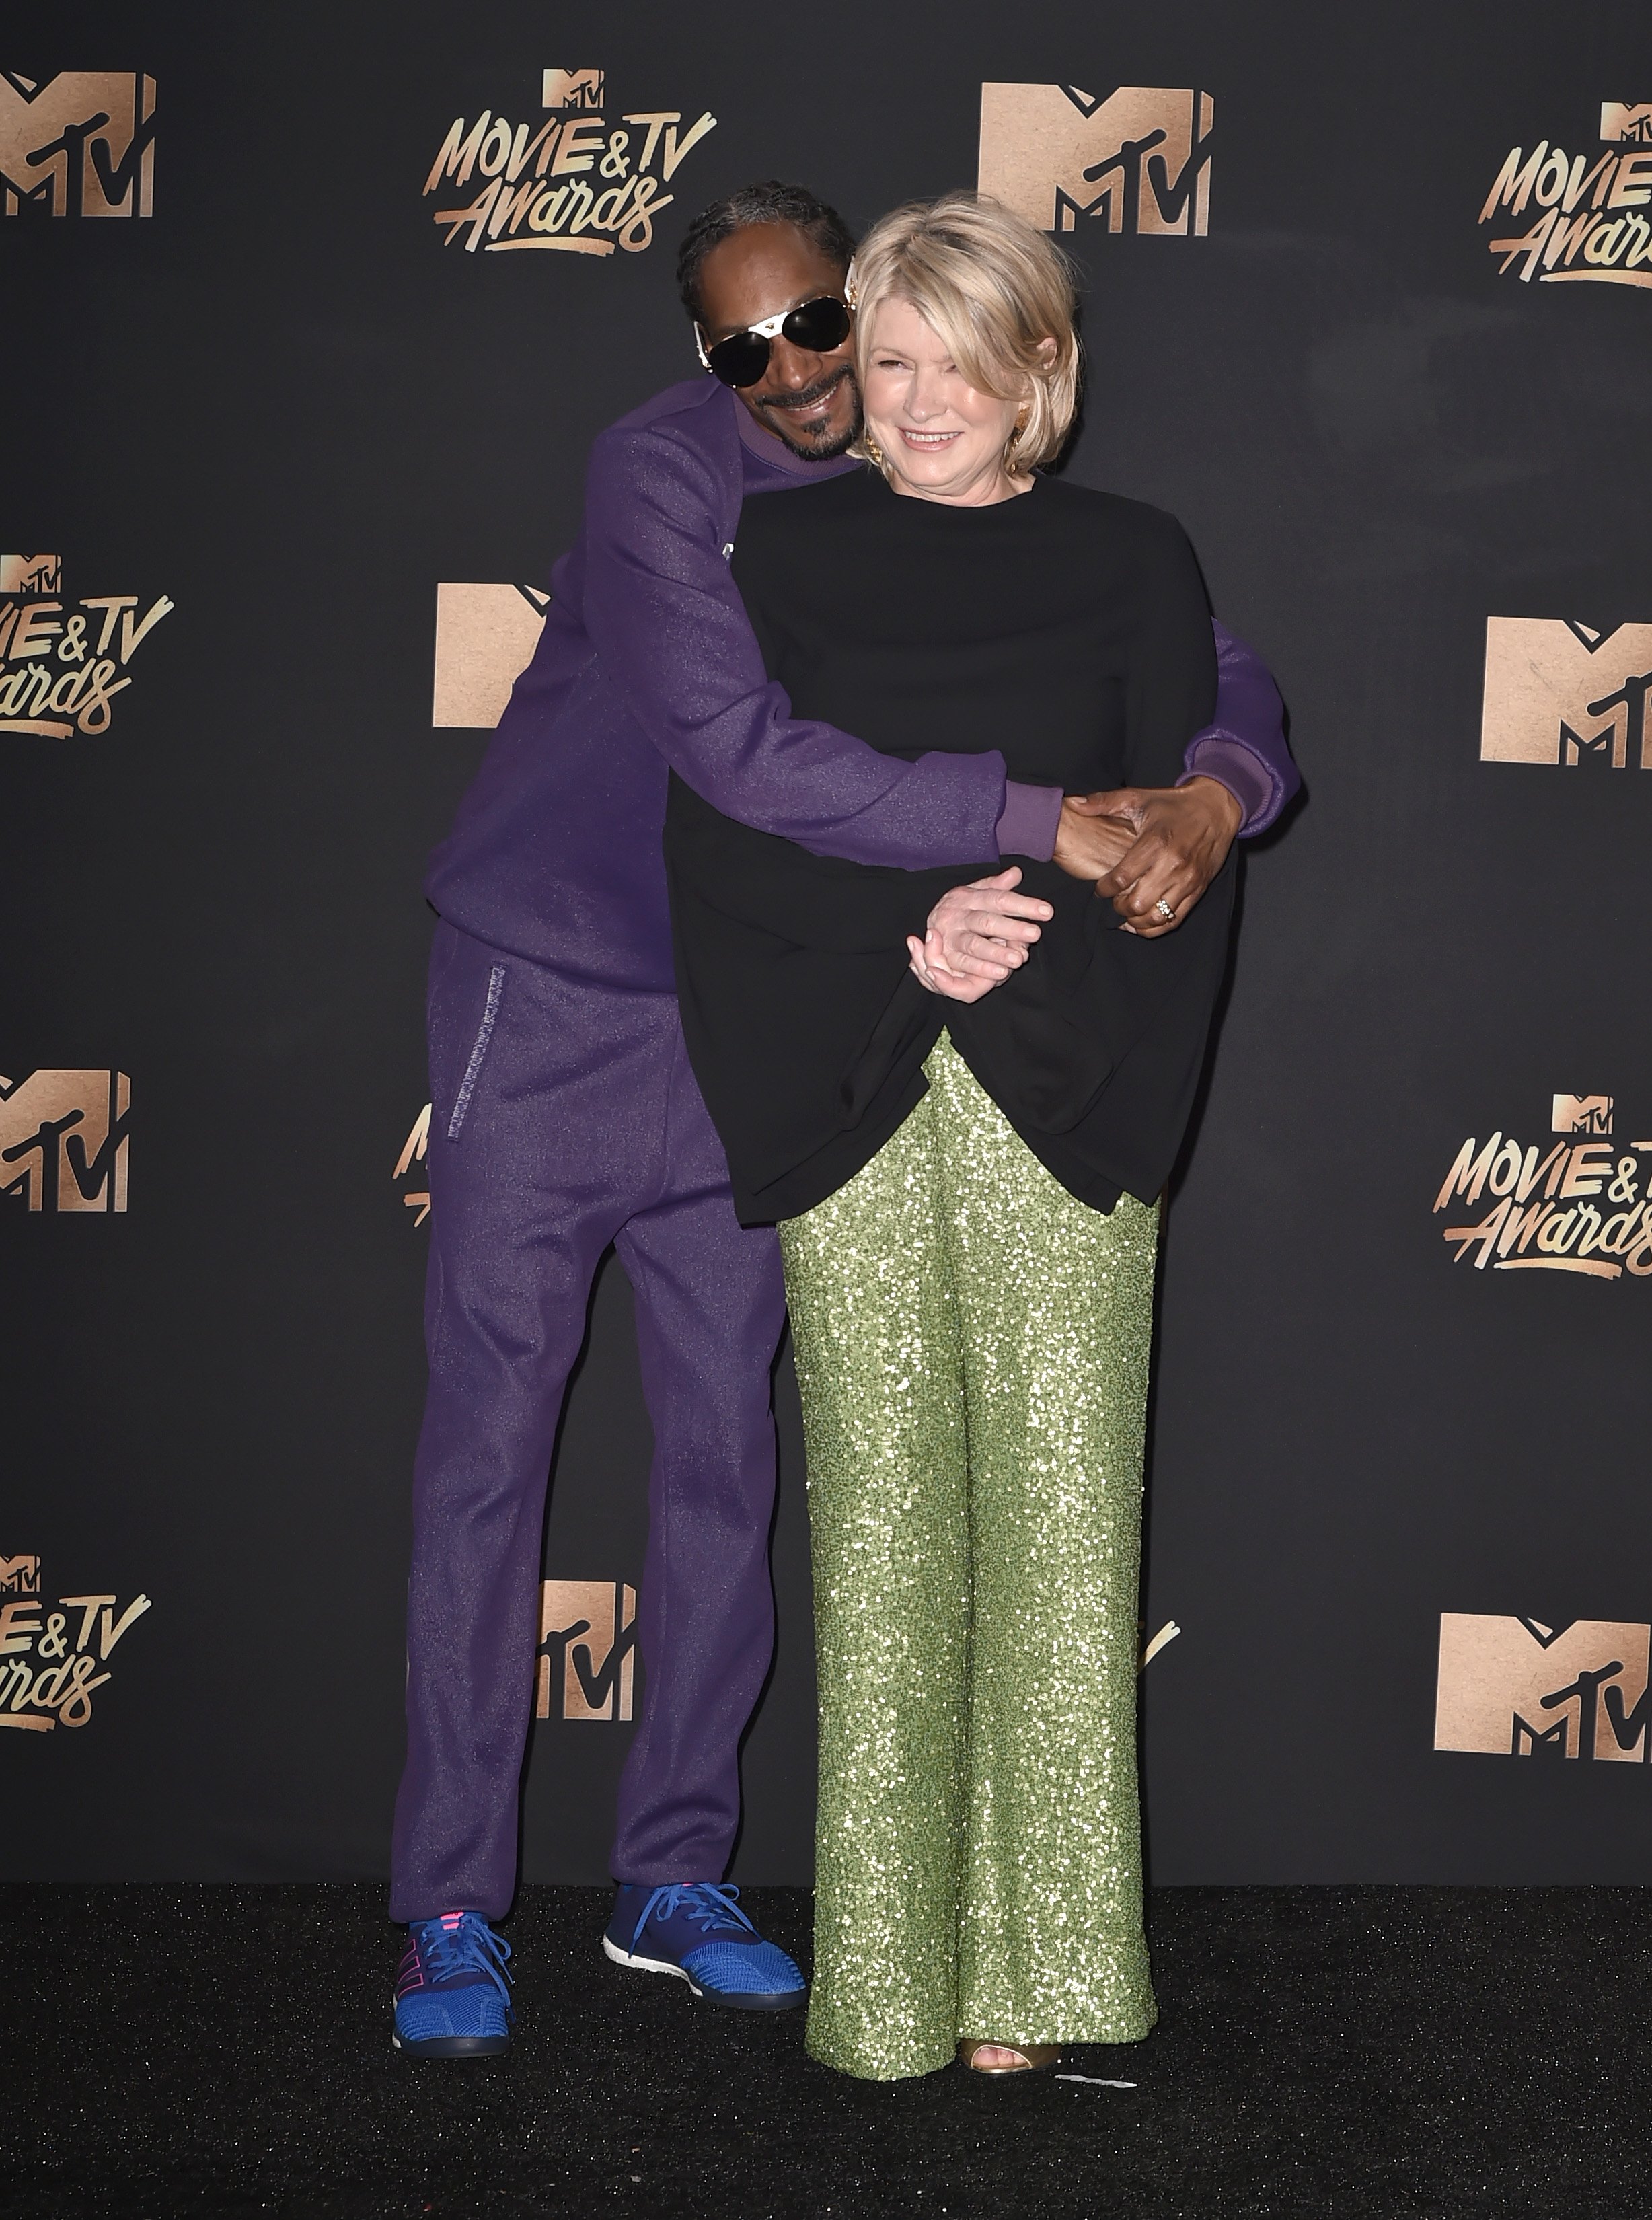 Snoop Dogg and Martha Stewart during the MTV Movie and TV Awards on May 7, 2017, in Los Angeles, California | Photo: David Crotty/Patrick McMullan/Getty Images